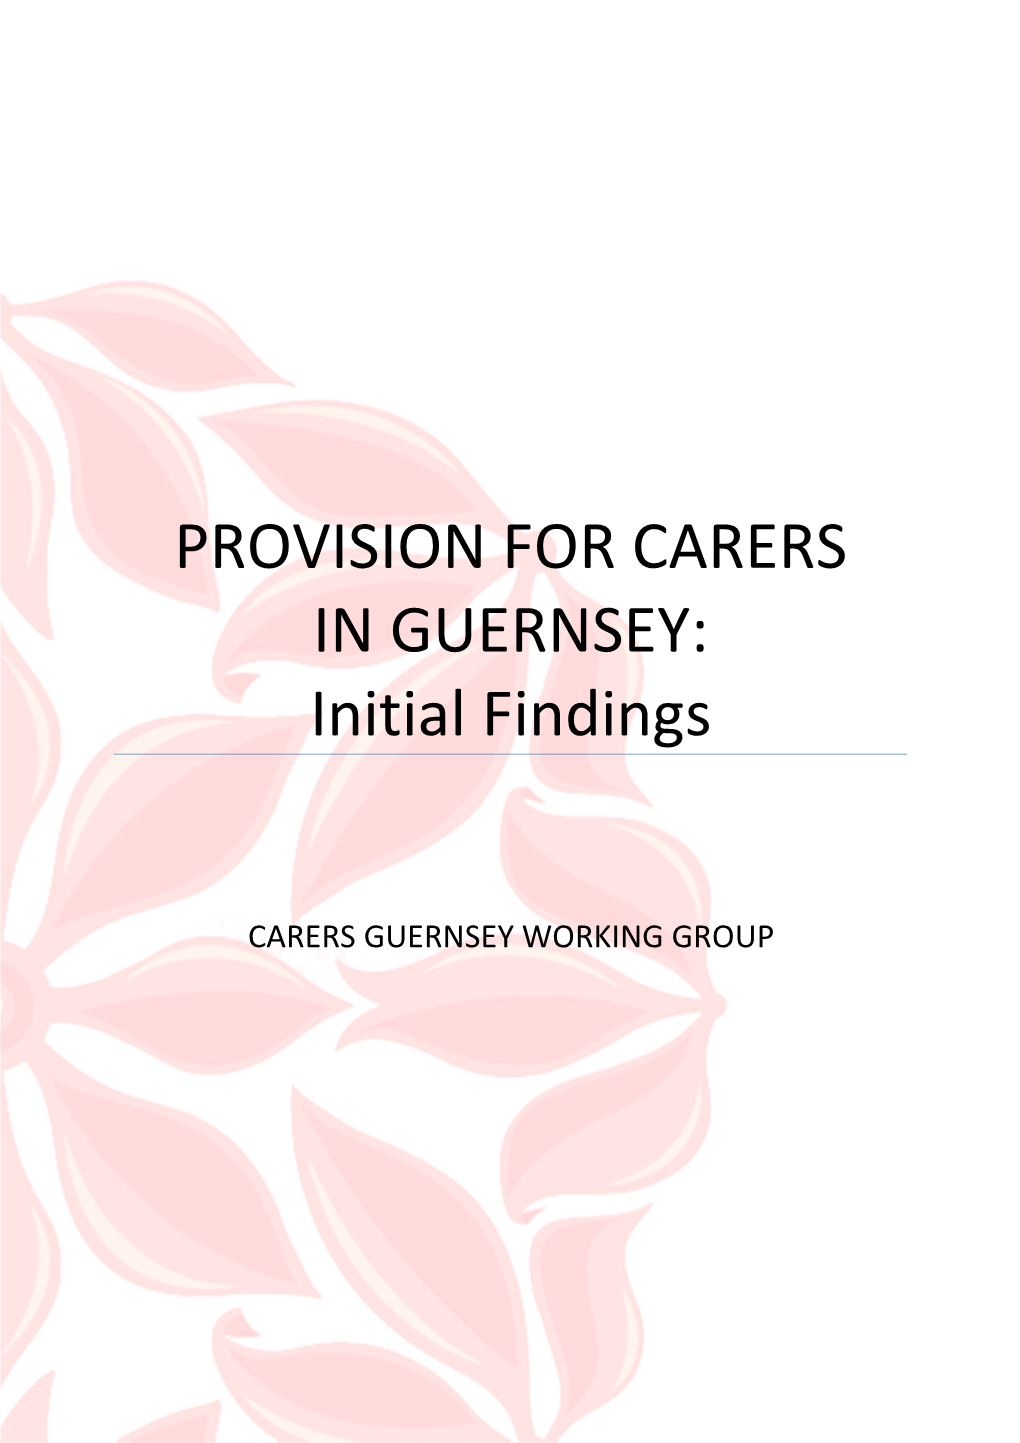 PROVISION for CARERS in GUERNSEY: Initial Findings